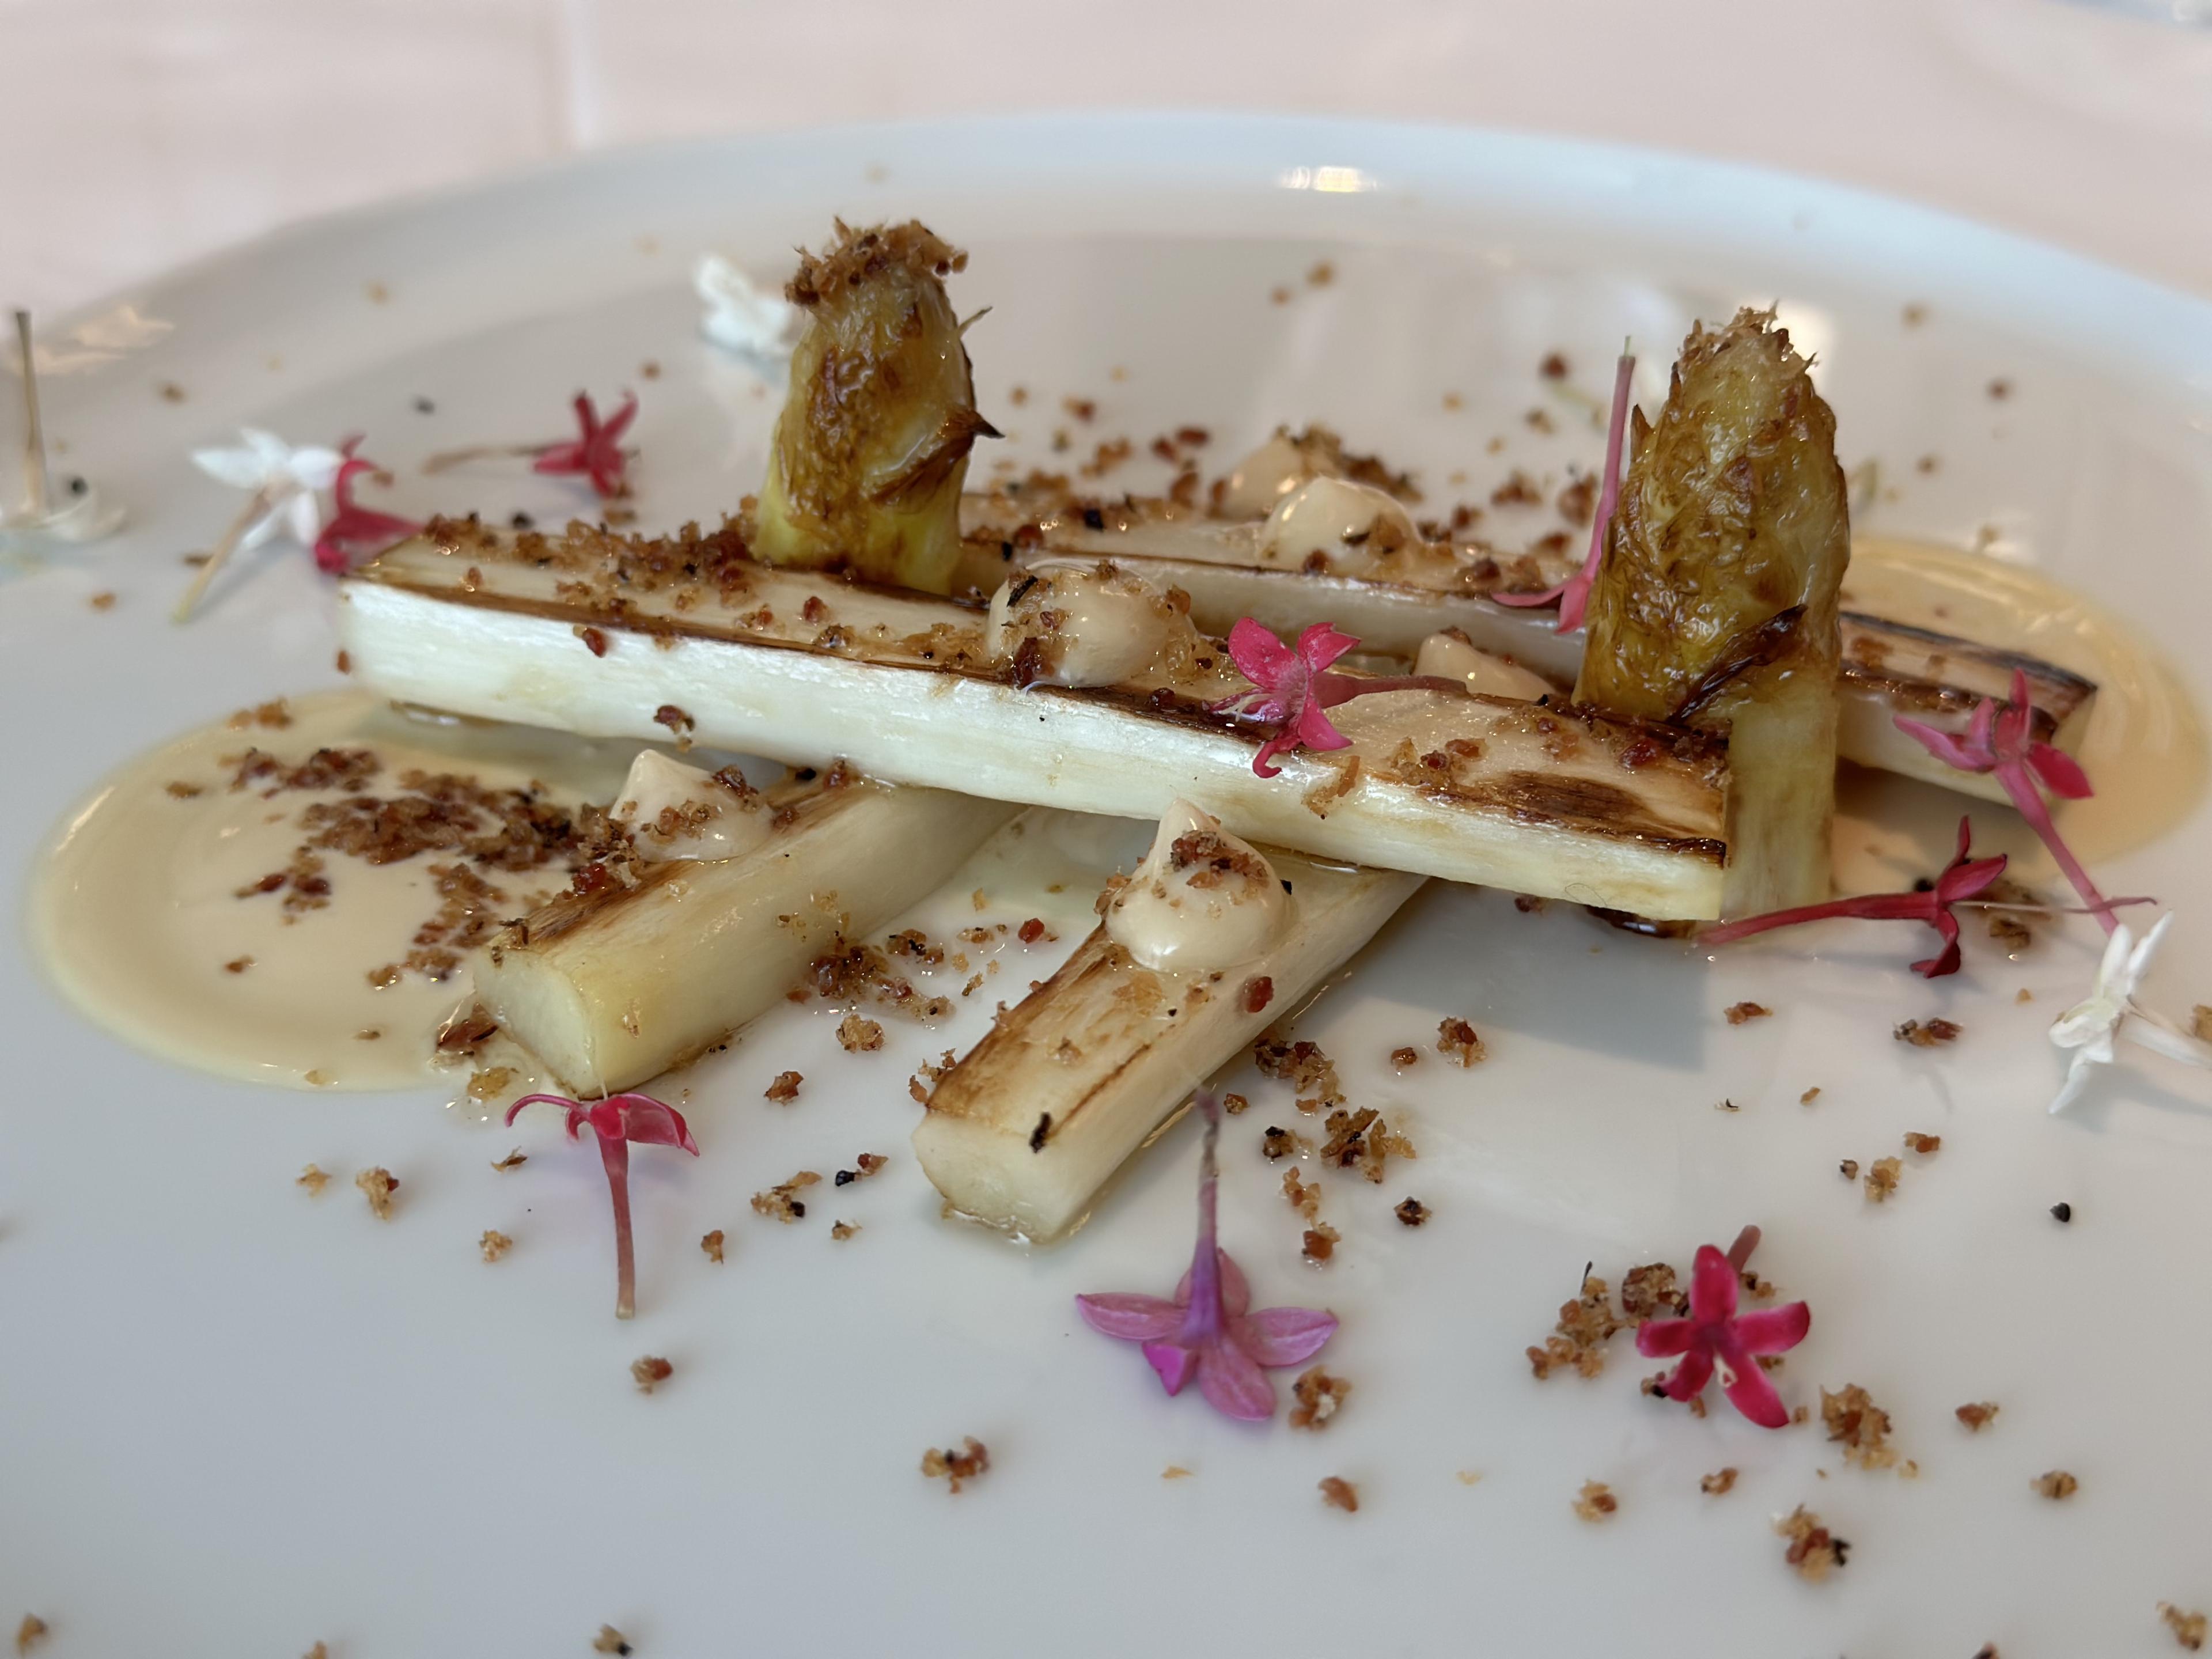 turnip with flower garnish on a white plate